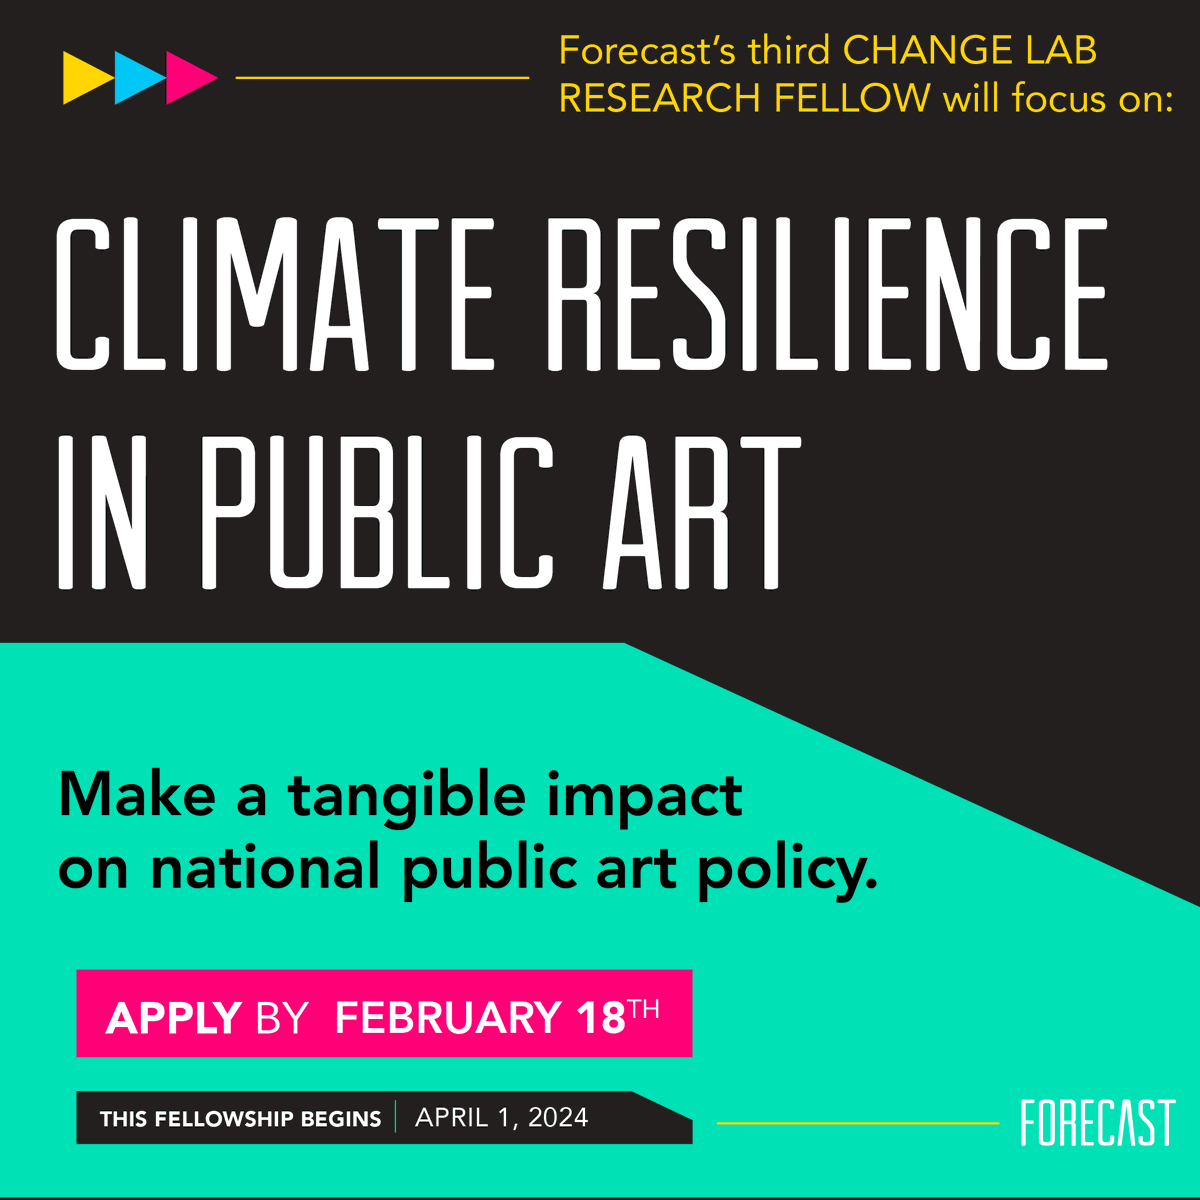 🔔⏰ Due Sunday: champion #ClimateResilience and #EnvironmentalJustice in #PublicArt. Be our next Change Lab Research Fellow and make a tangible impact on national US public art policy. bit.ly/FPAfellow3 Apply by 11:59pm CT, 2/18. WFH, $5K stipend, begins 4/1. Please RT